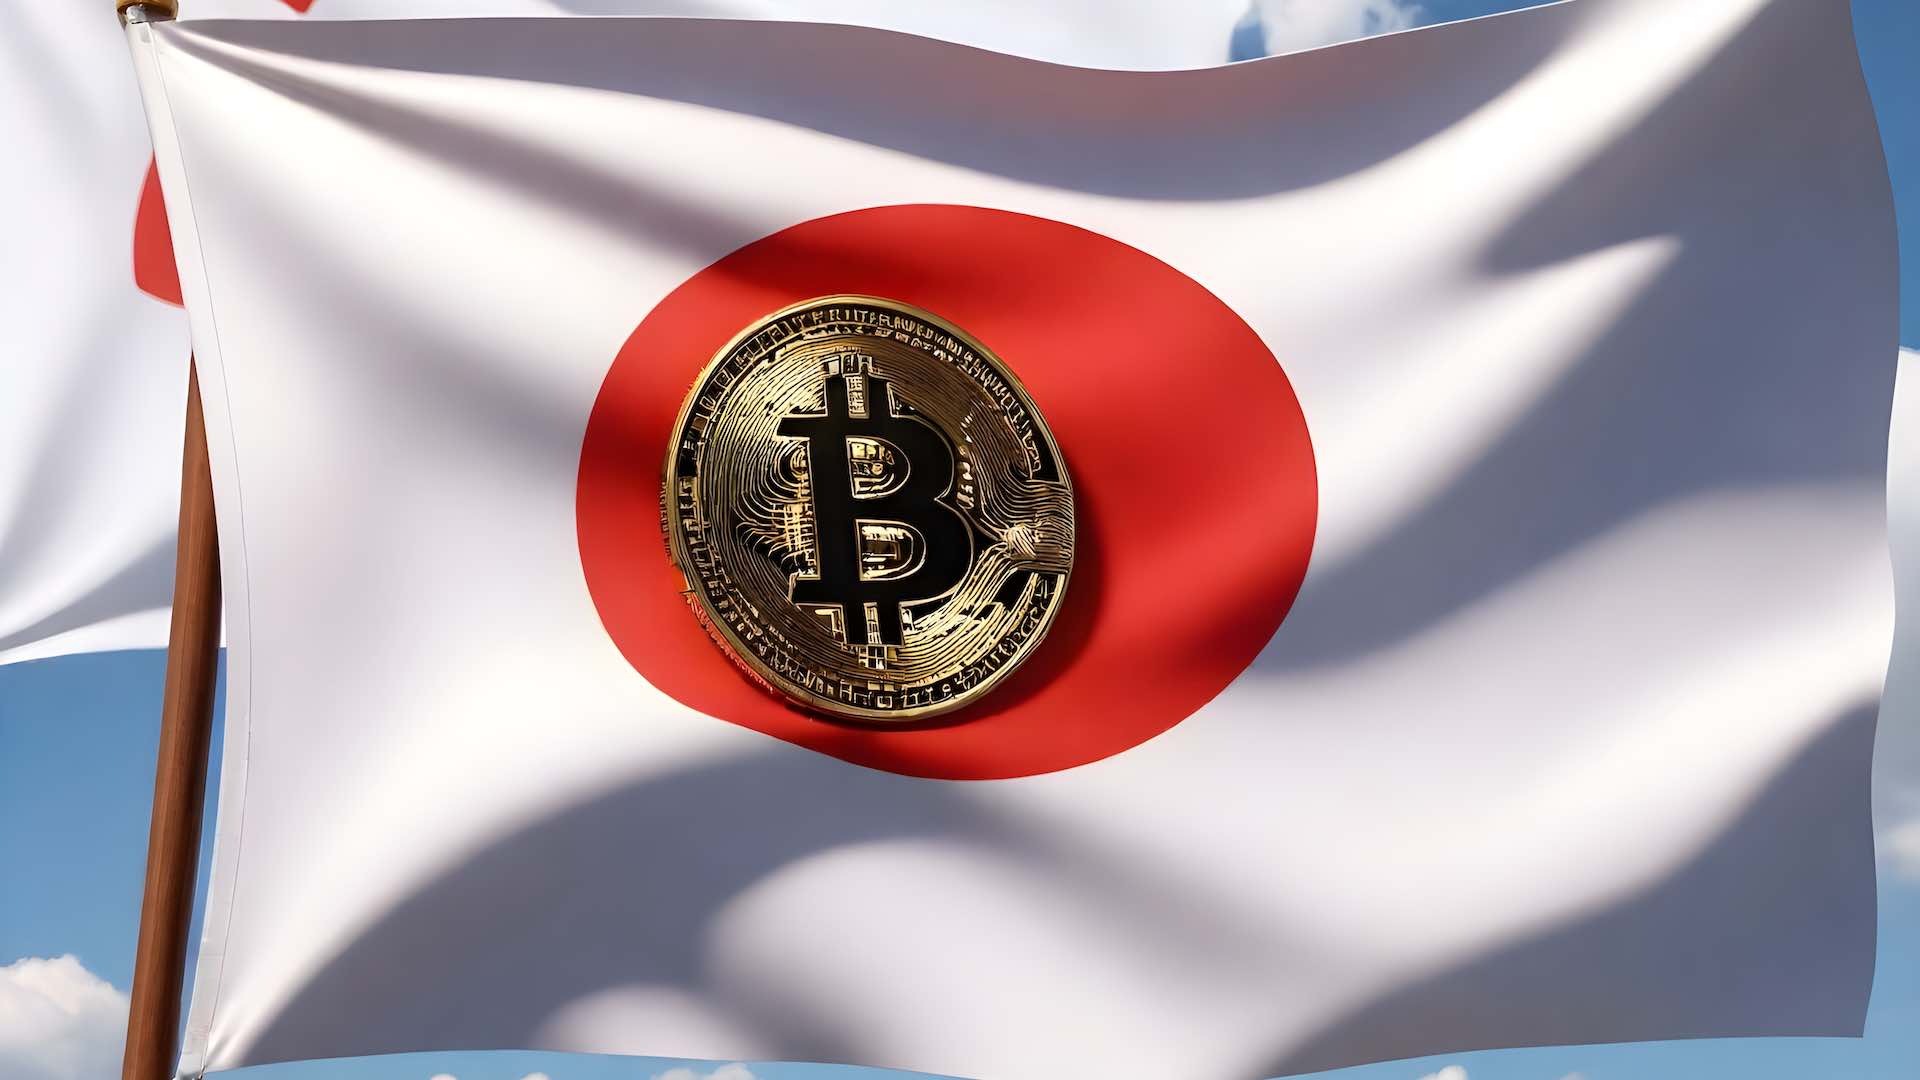 Japanese firm Metaplanet dives into bitcoin with ¥1 billion purchase